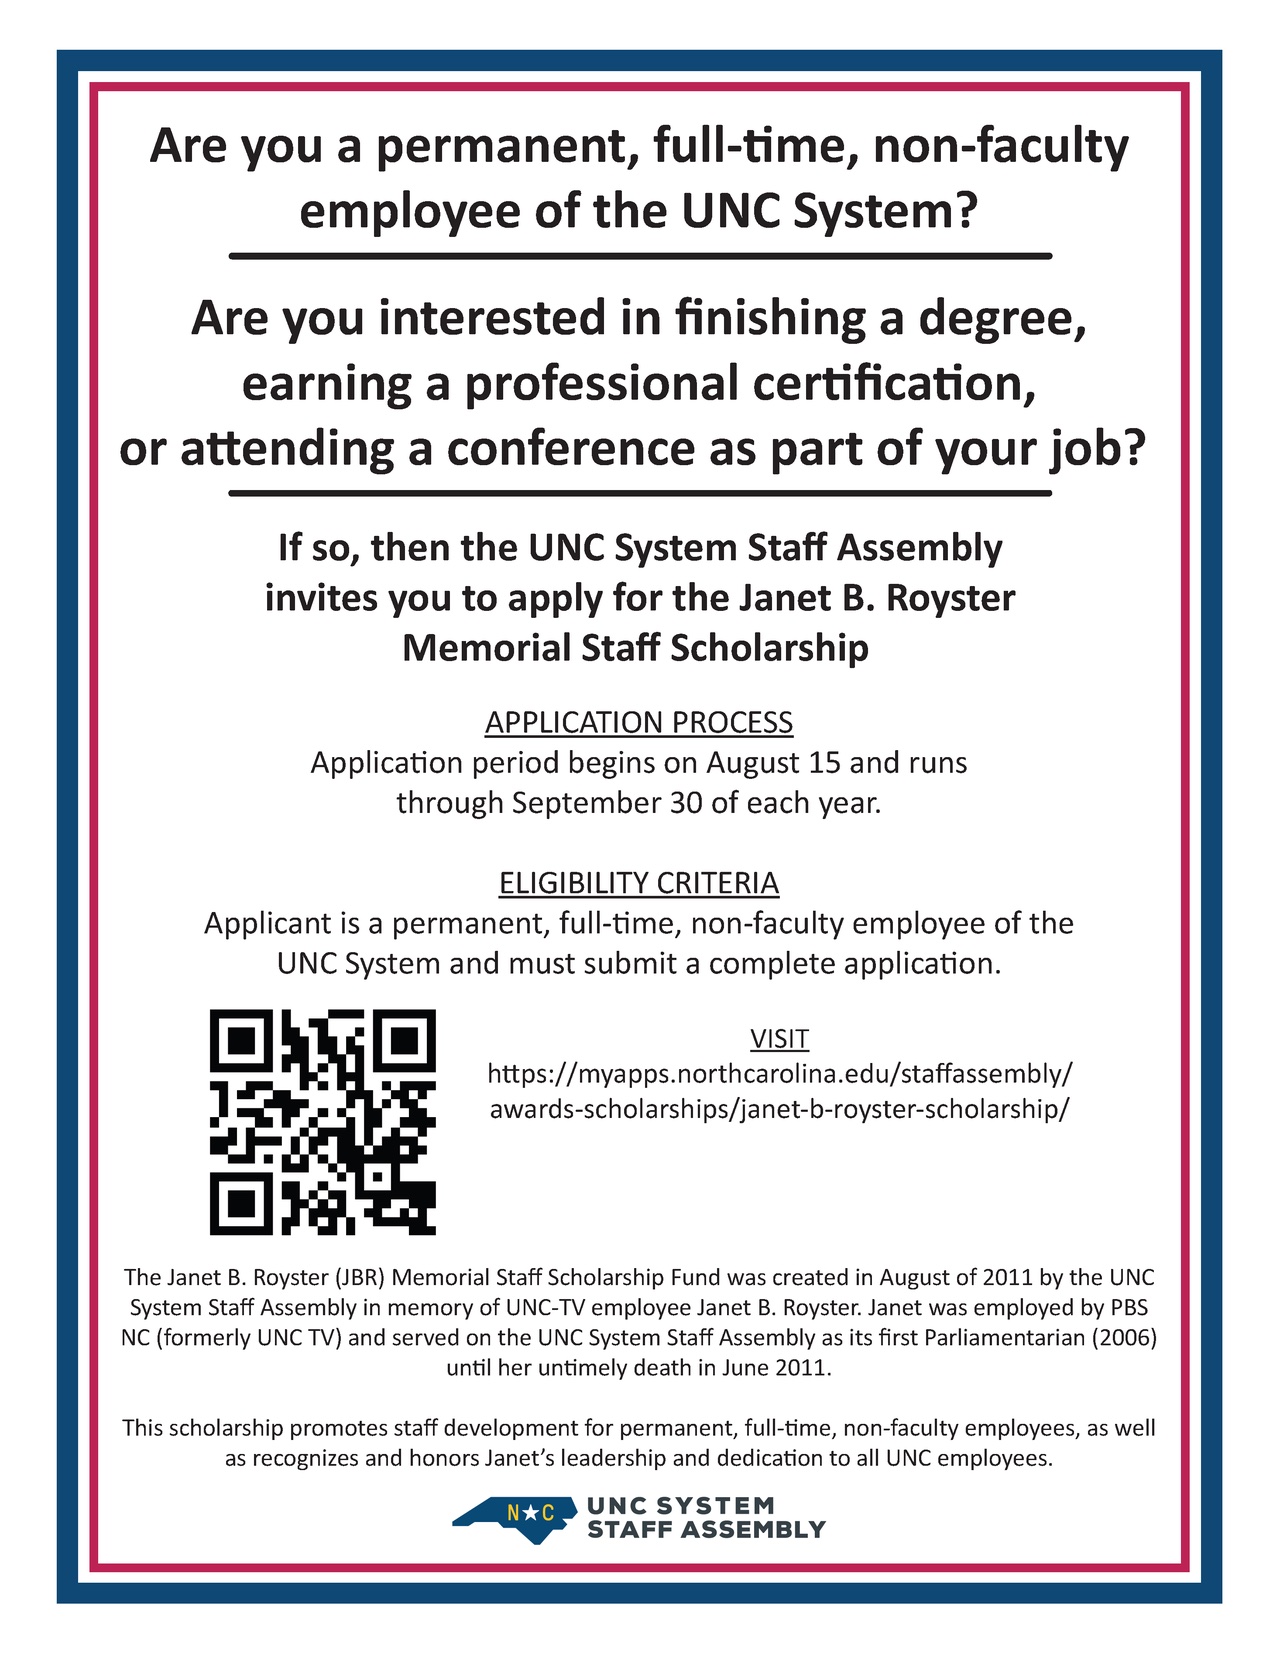 A poster promoting a scholarship to UNCG staff with a QR code for applying.